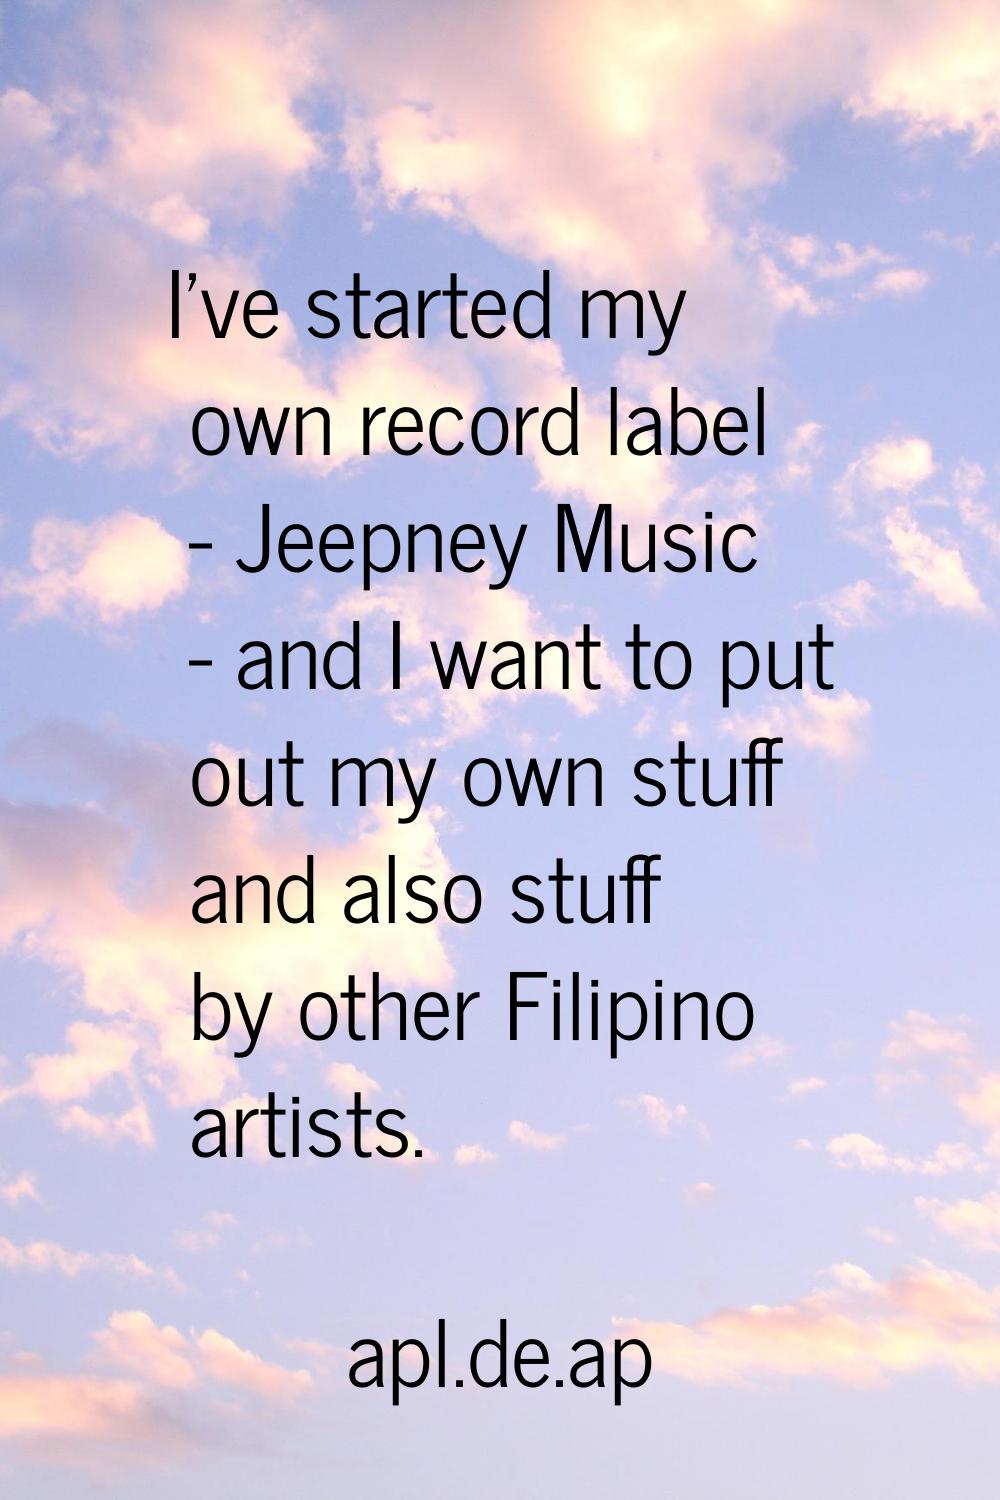 I've started my own record label - Jeepney Music - and I want to put out my own stuff and also stuf